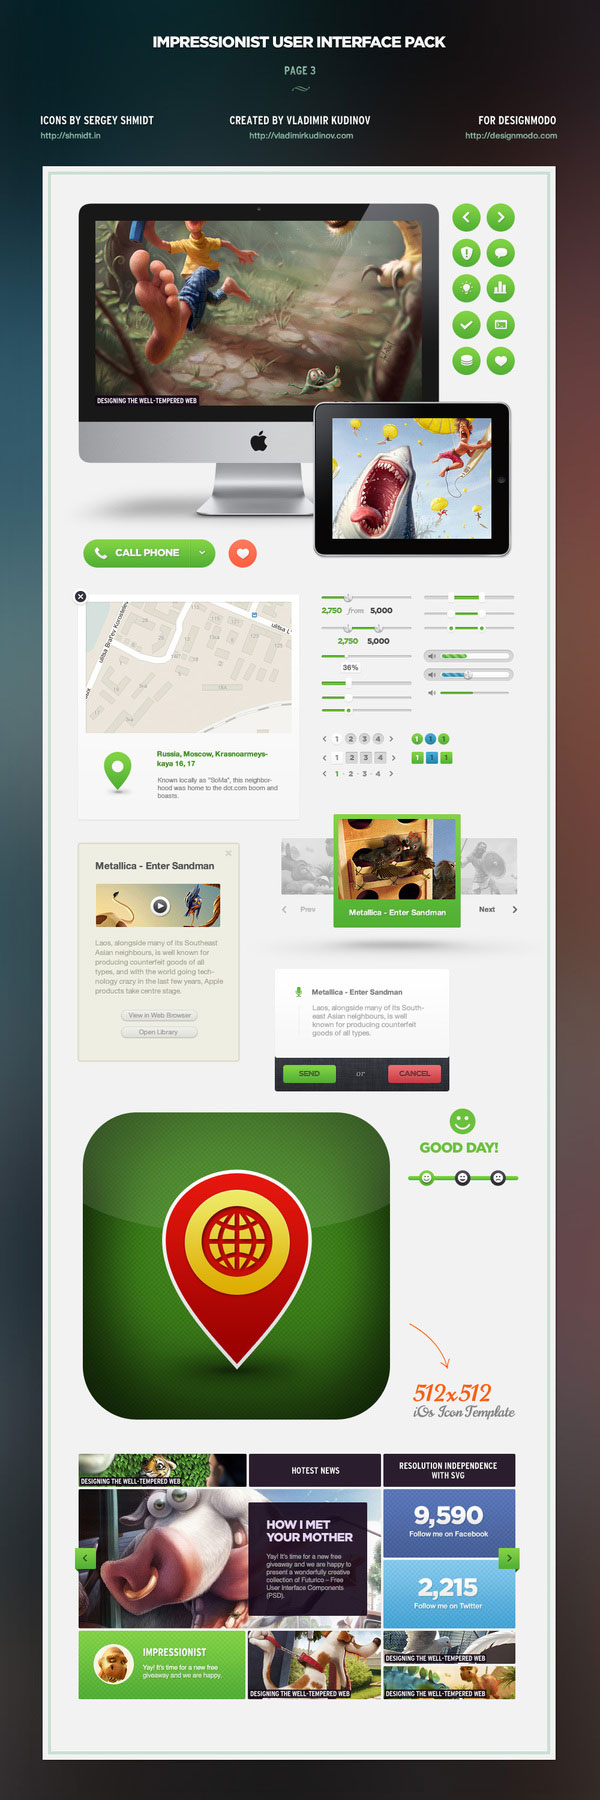 Impressionist User Interface Pack Page 3